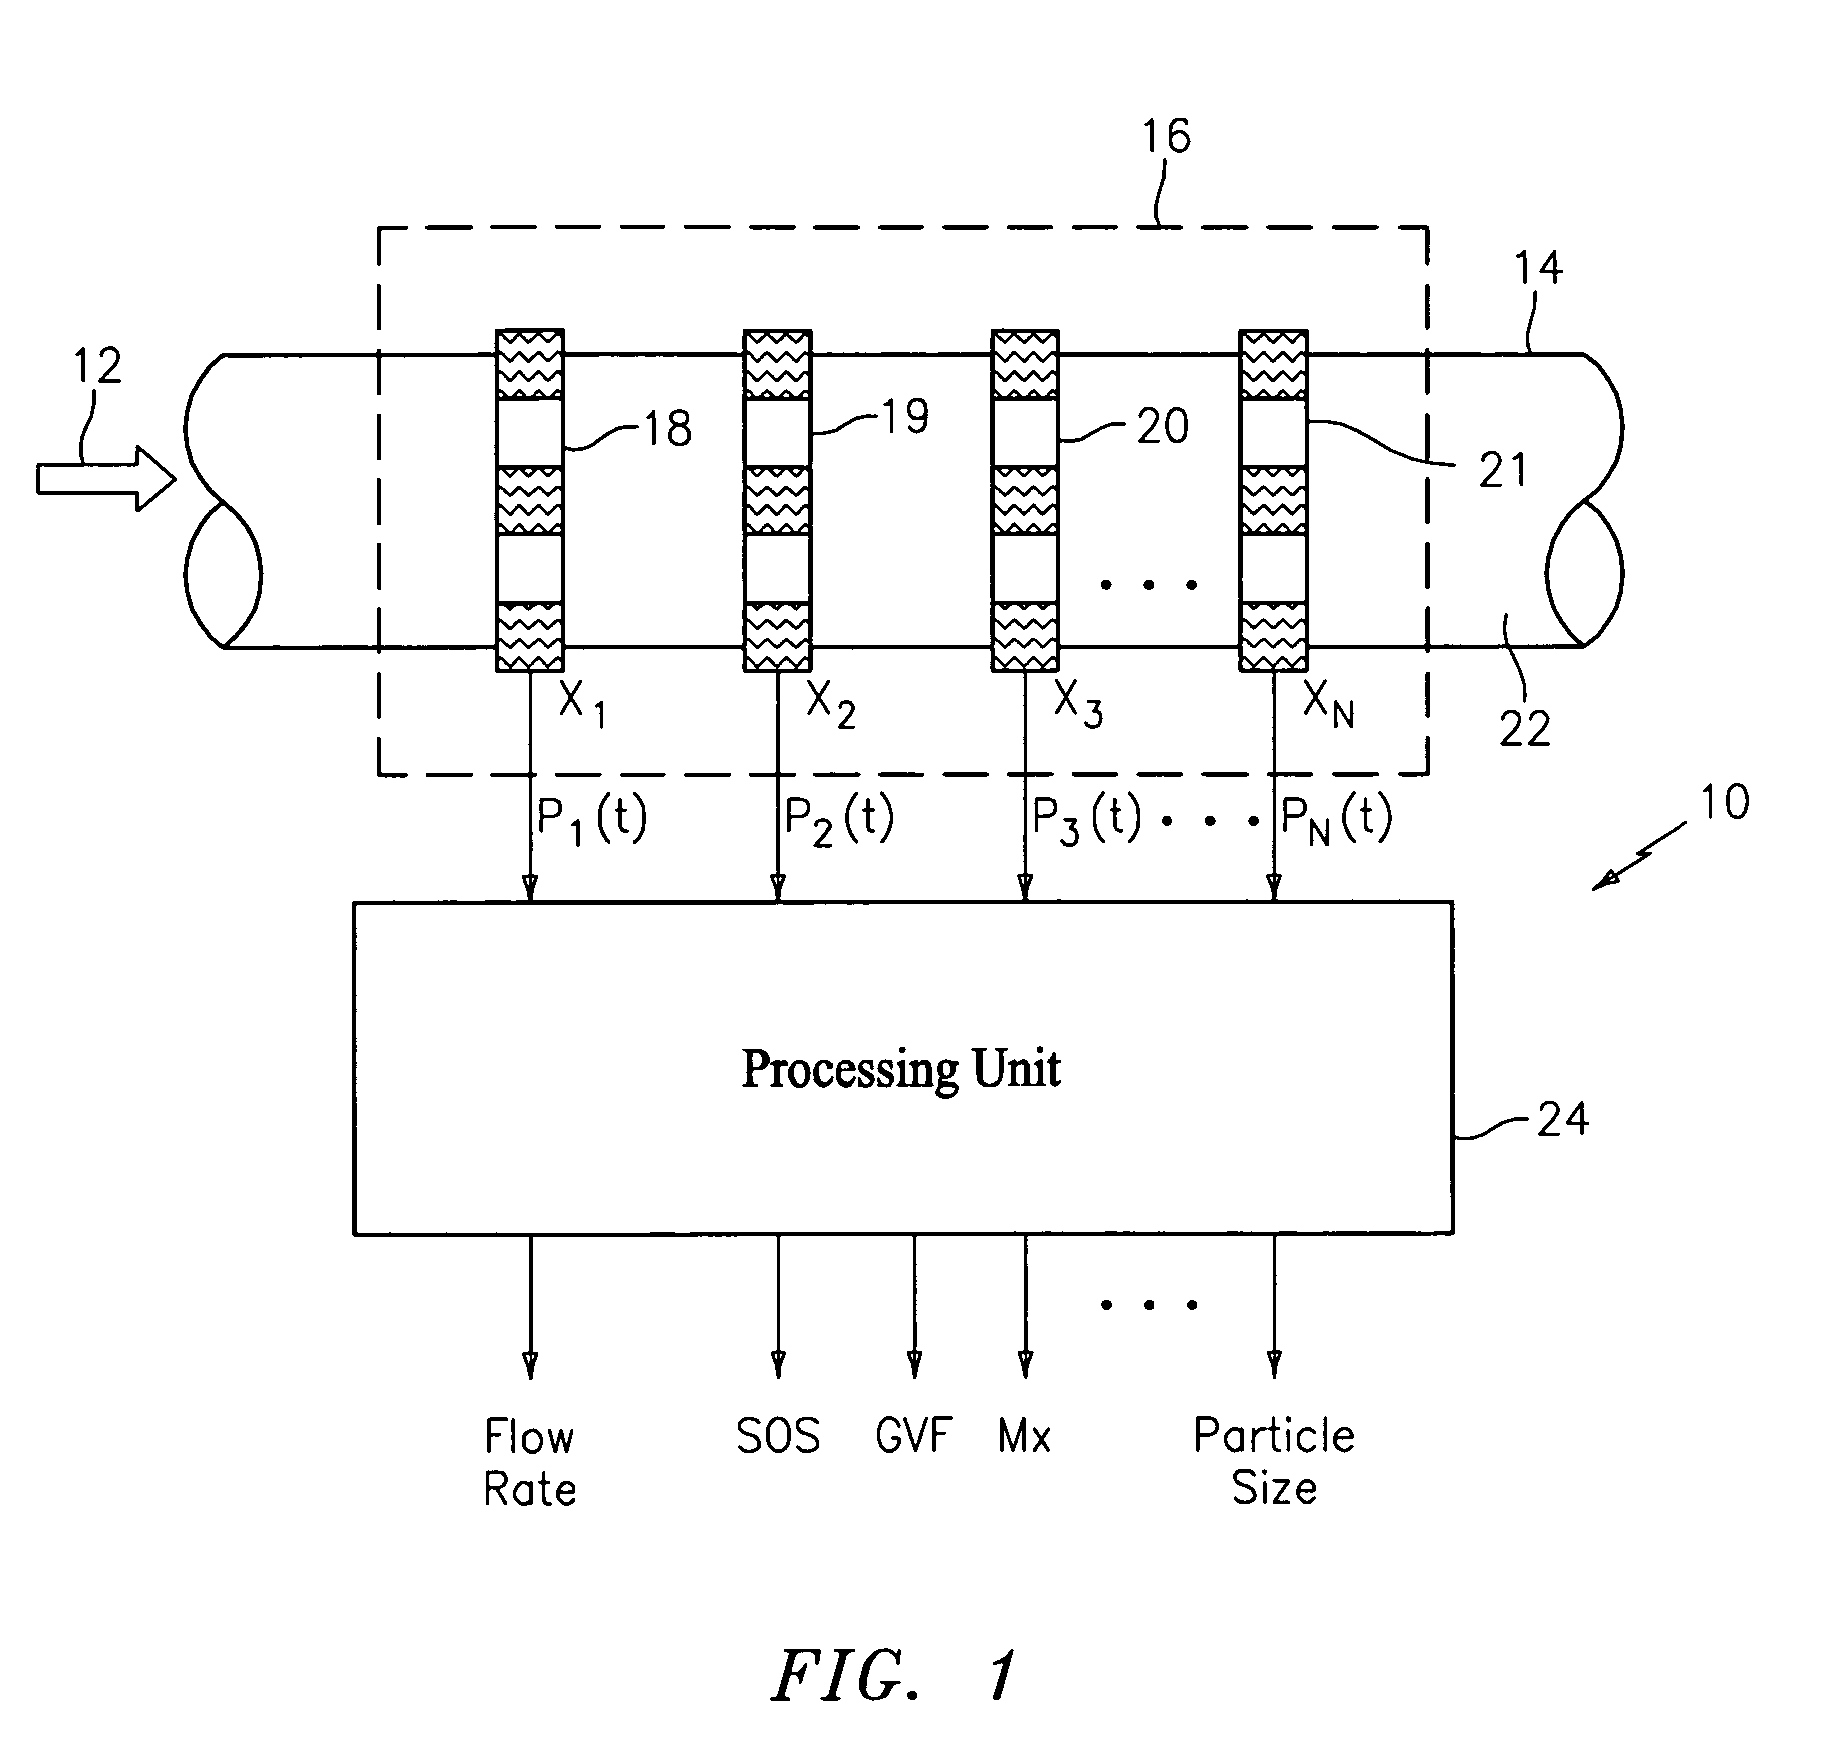 Apparatus and method for measuring unsteady pressures within a large diameter pipe